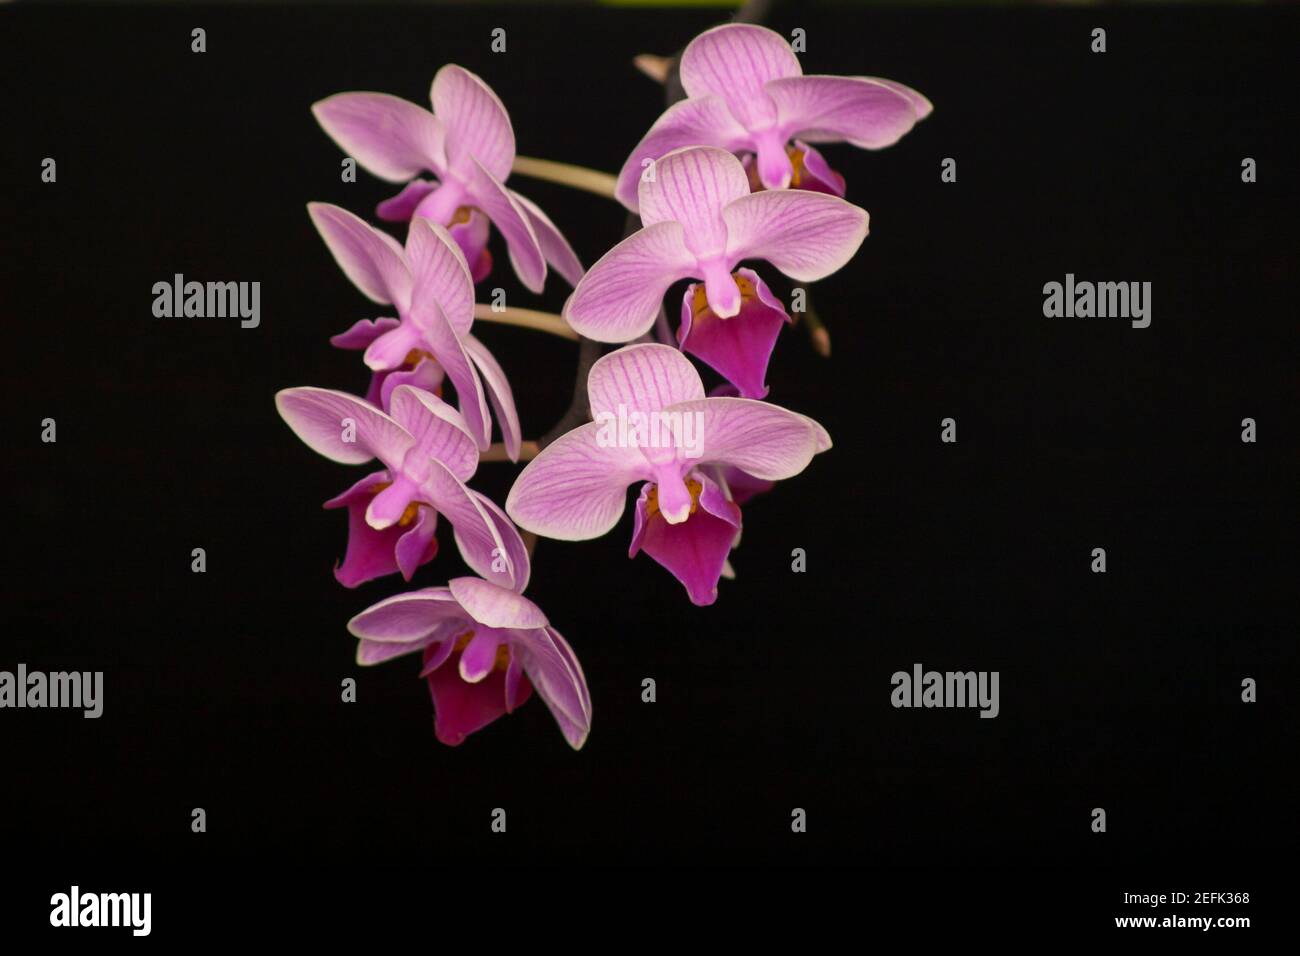 Orchid flowers Phalaenopsis Perceval mini. Branch of flowering Orchid Phalaenopsis Perceval mini (known as butterfly orchids) on a black background Stock Photo